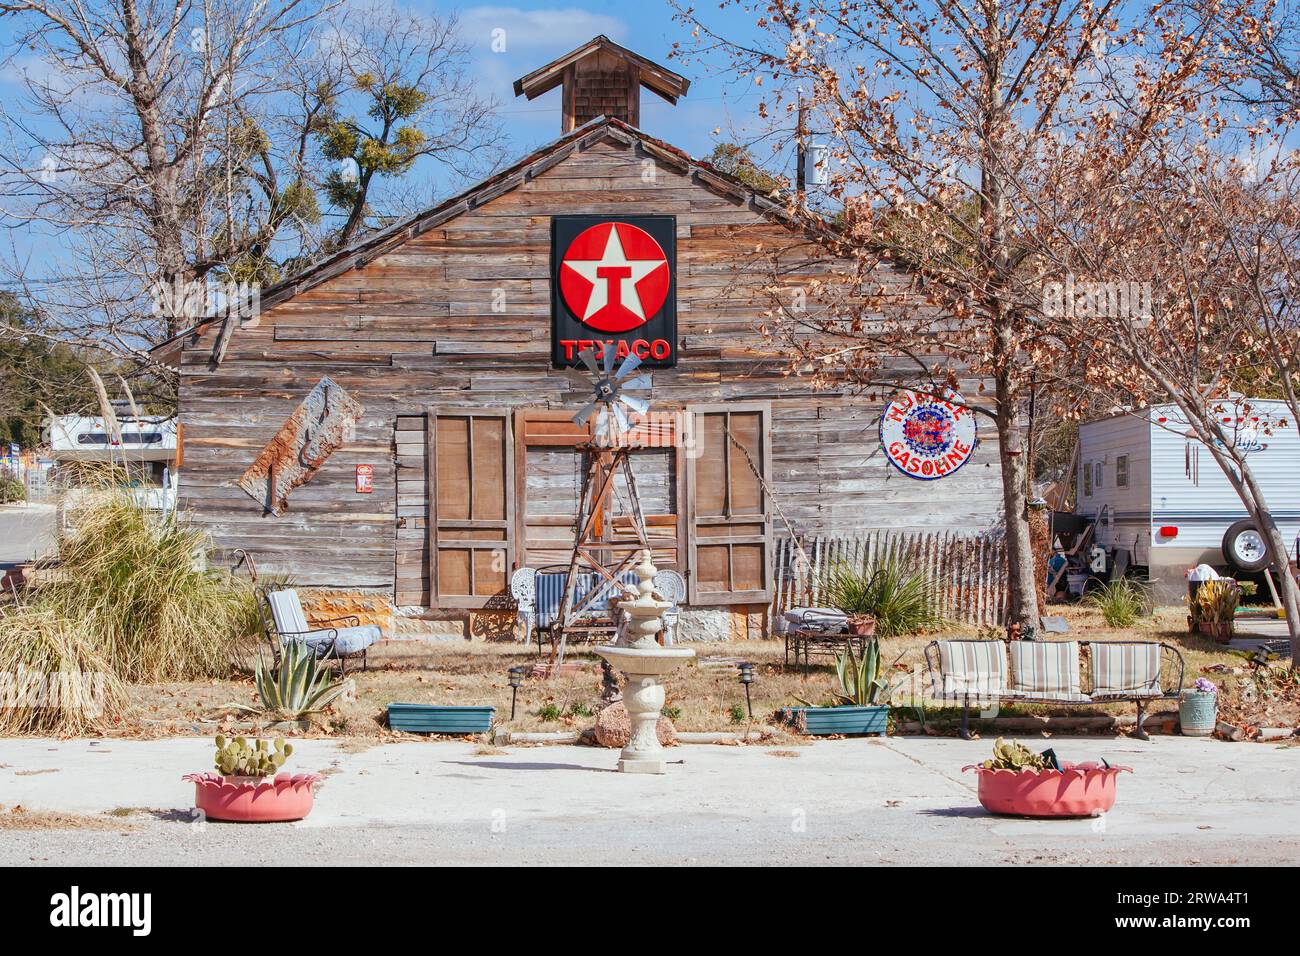 Camp Wood, USA, January 27 2013: Building architecture in the rural town of Camp Wood in Texas, USA Stock Photo